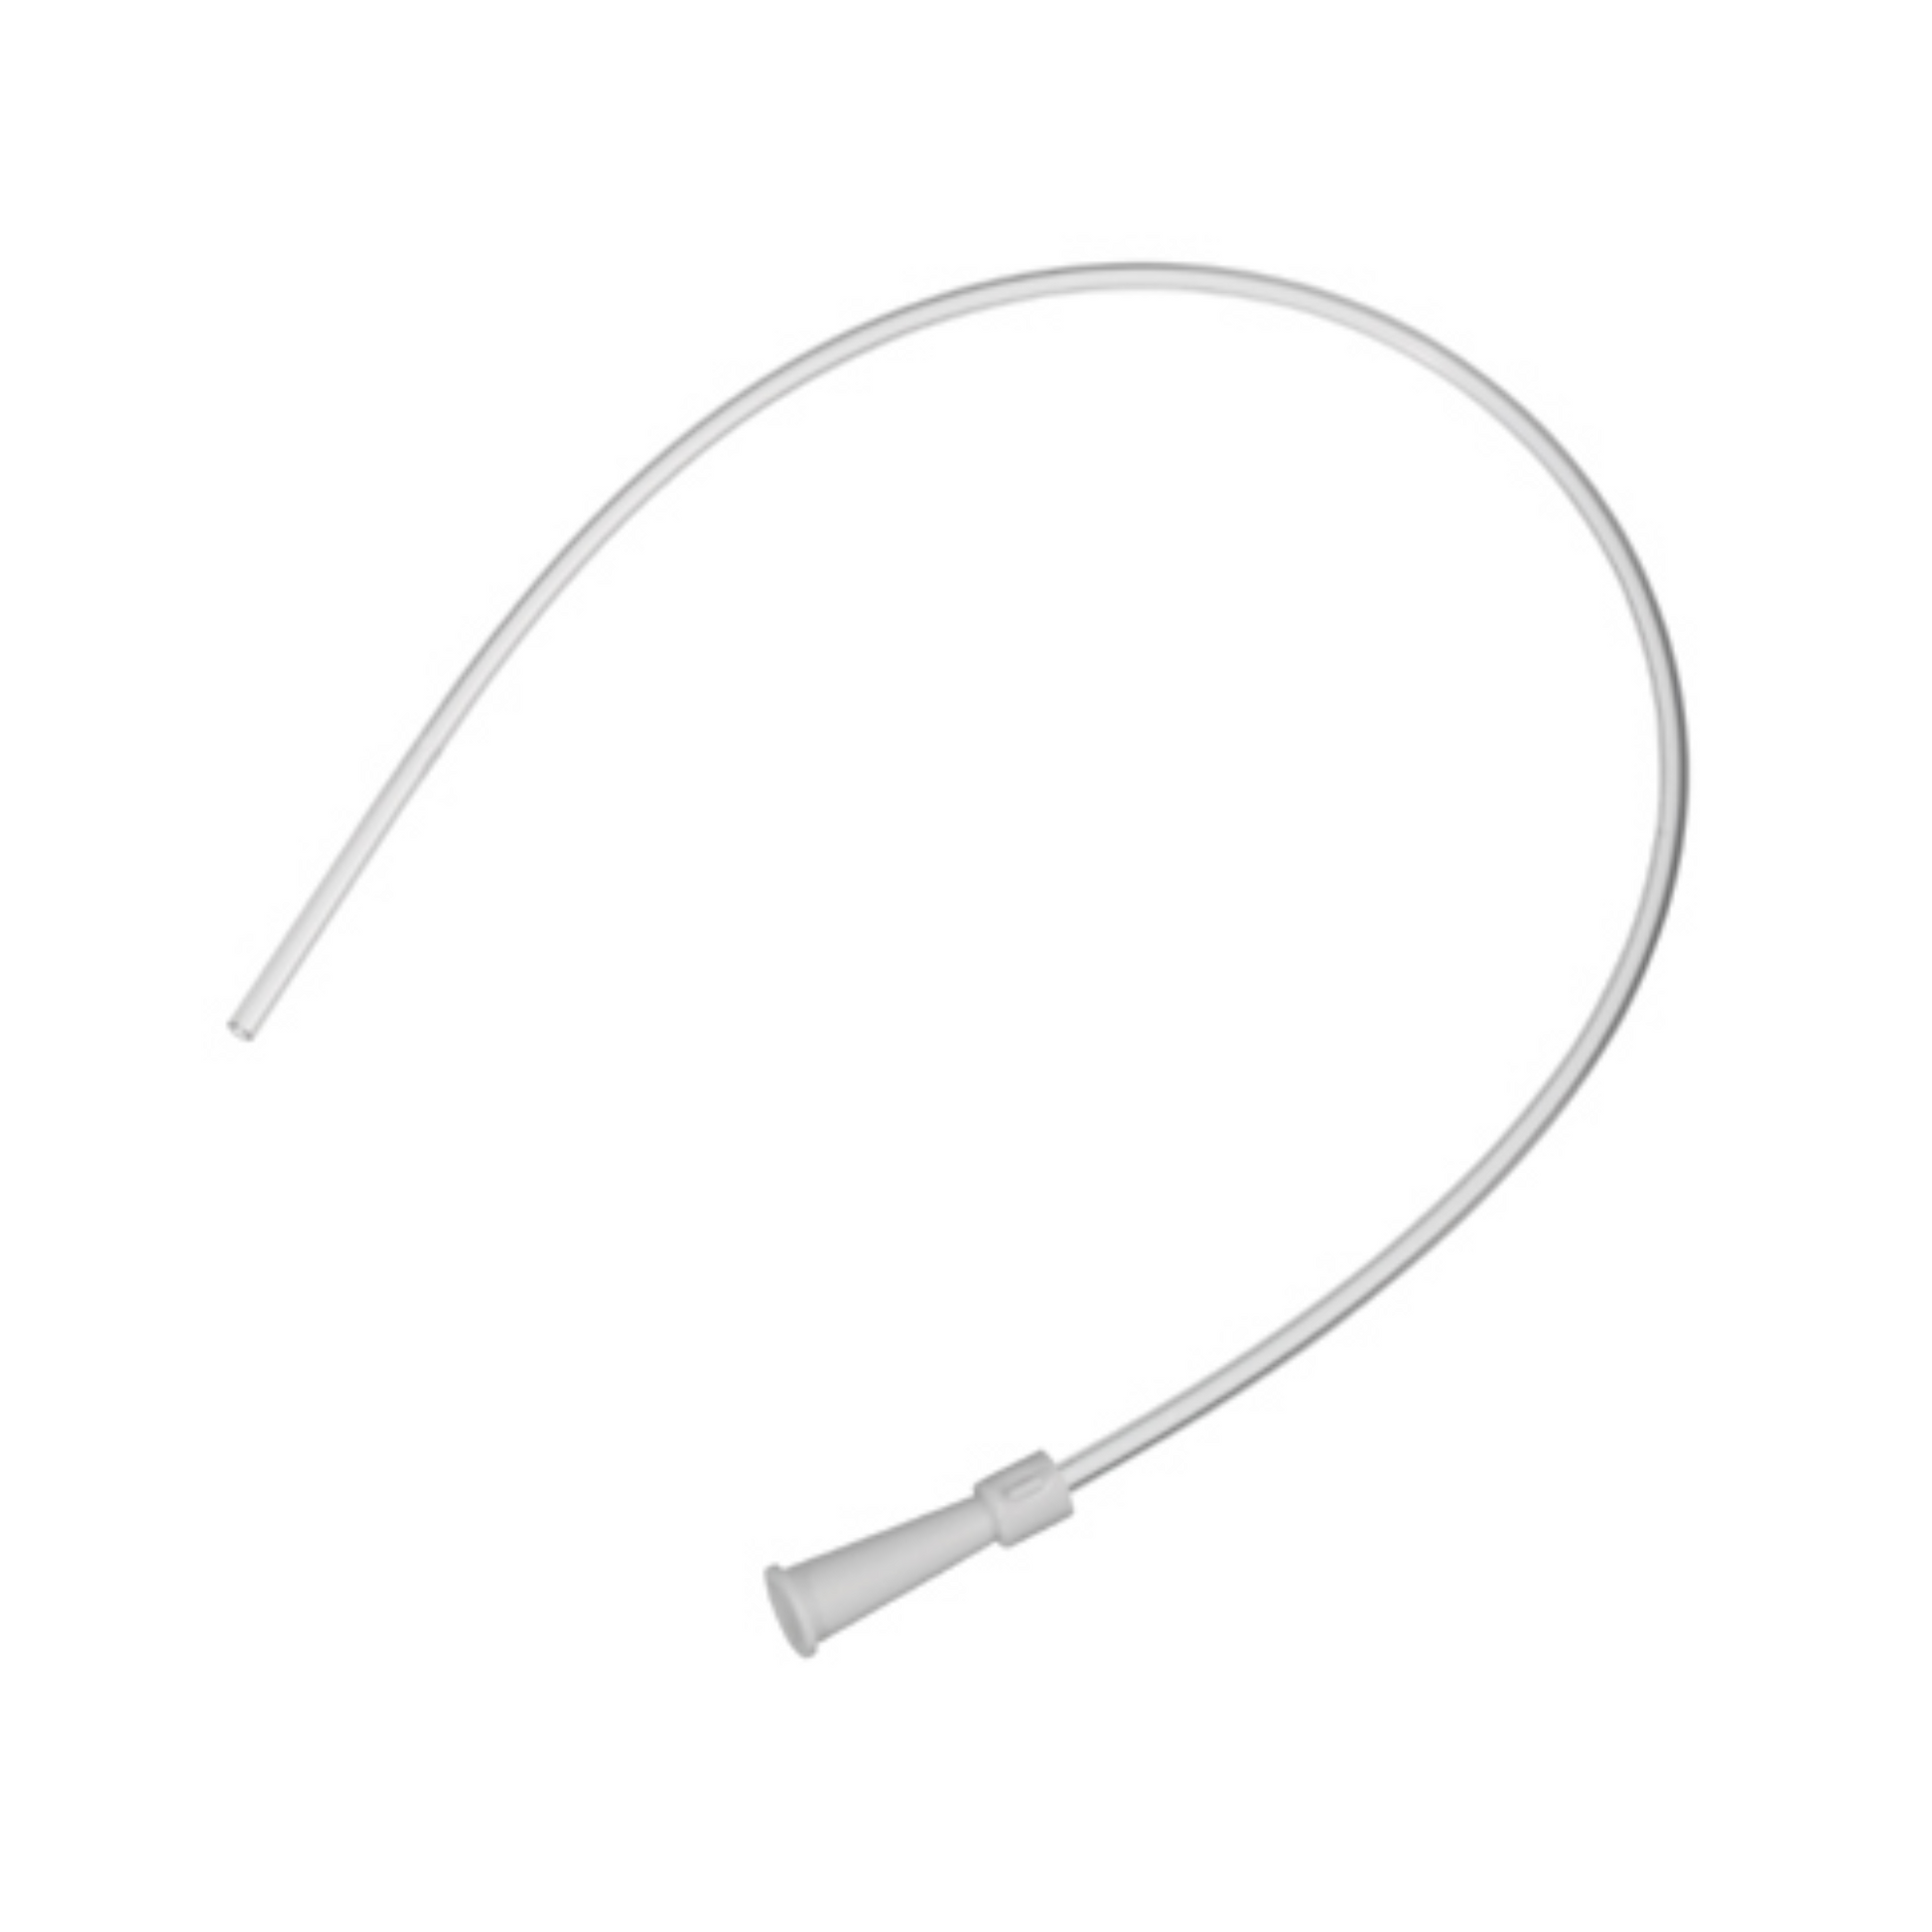 B. brown suction catheter type standard, straight lace